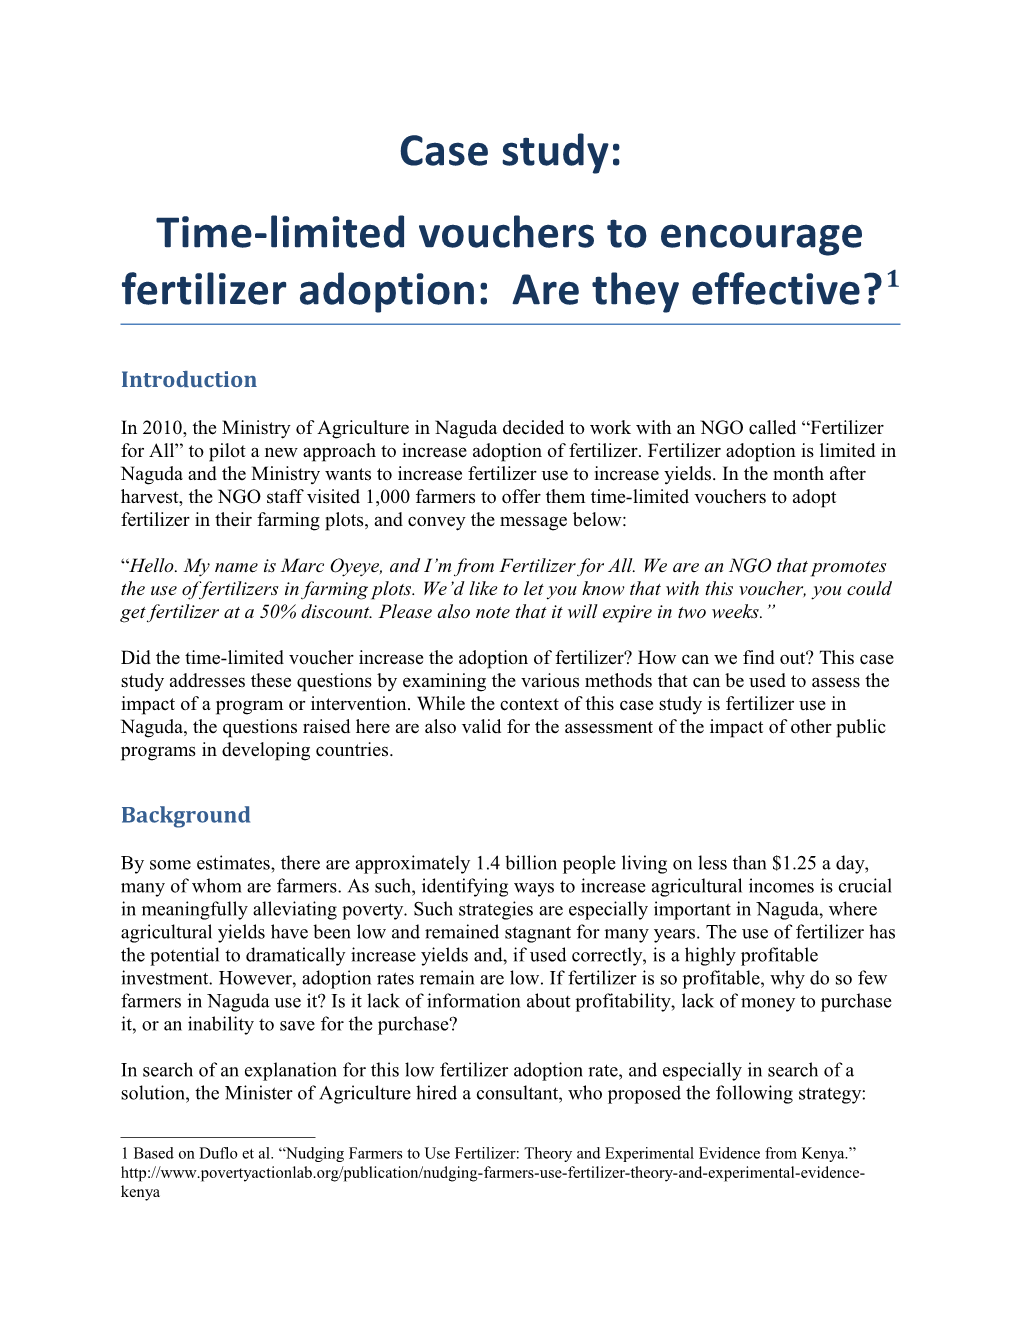 Time-Limited Vouchers to Encourage Fertilizer Adoption: Are They Effective? 1